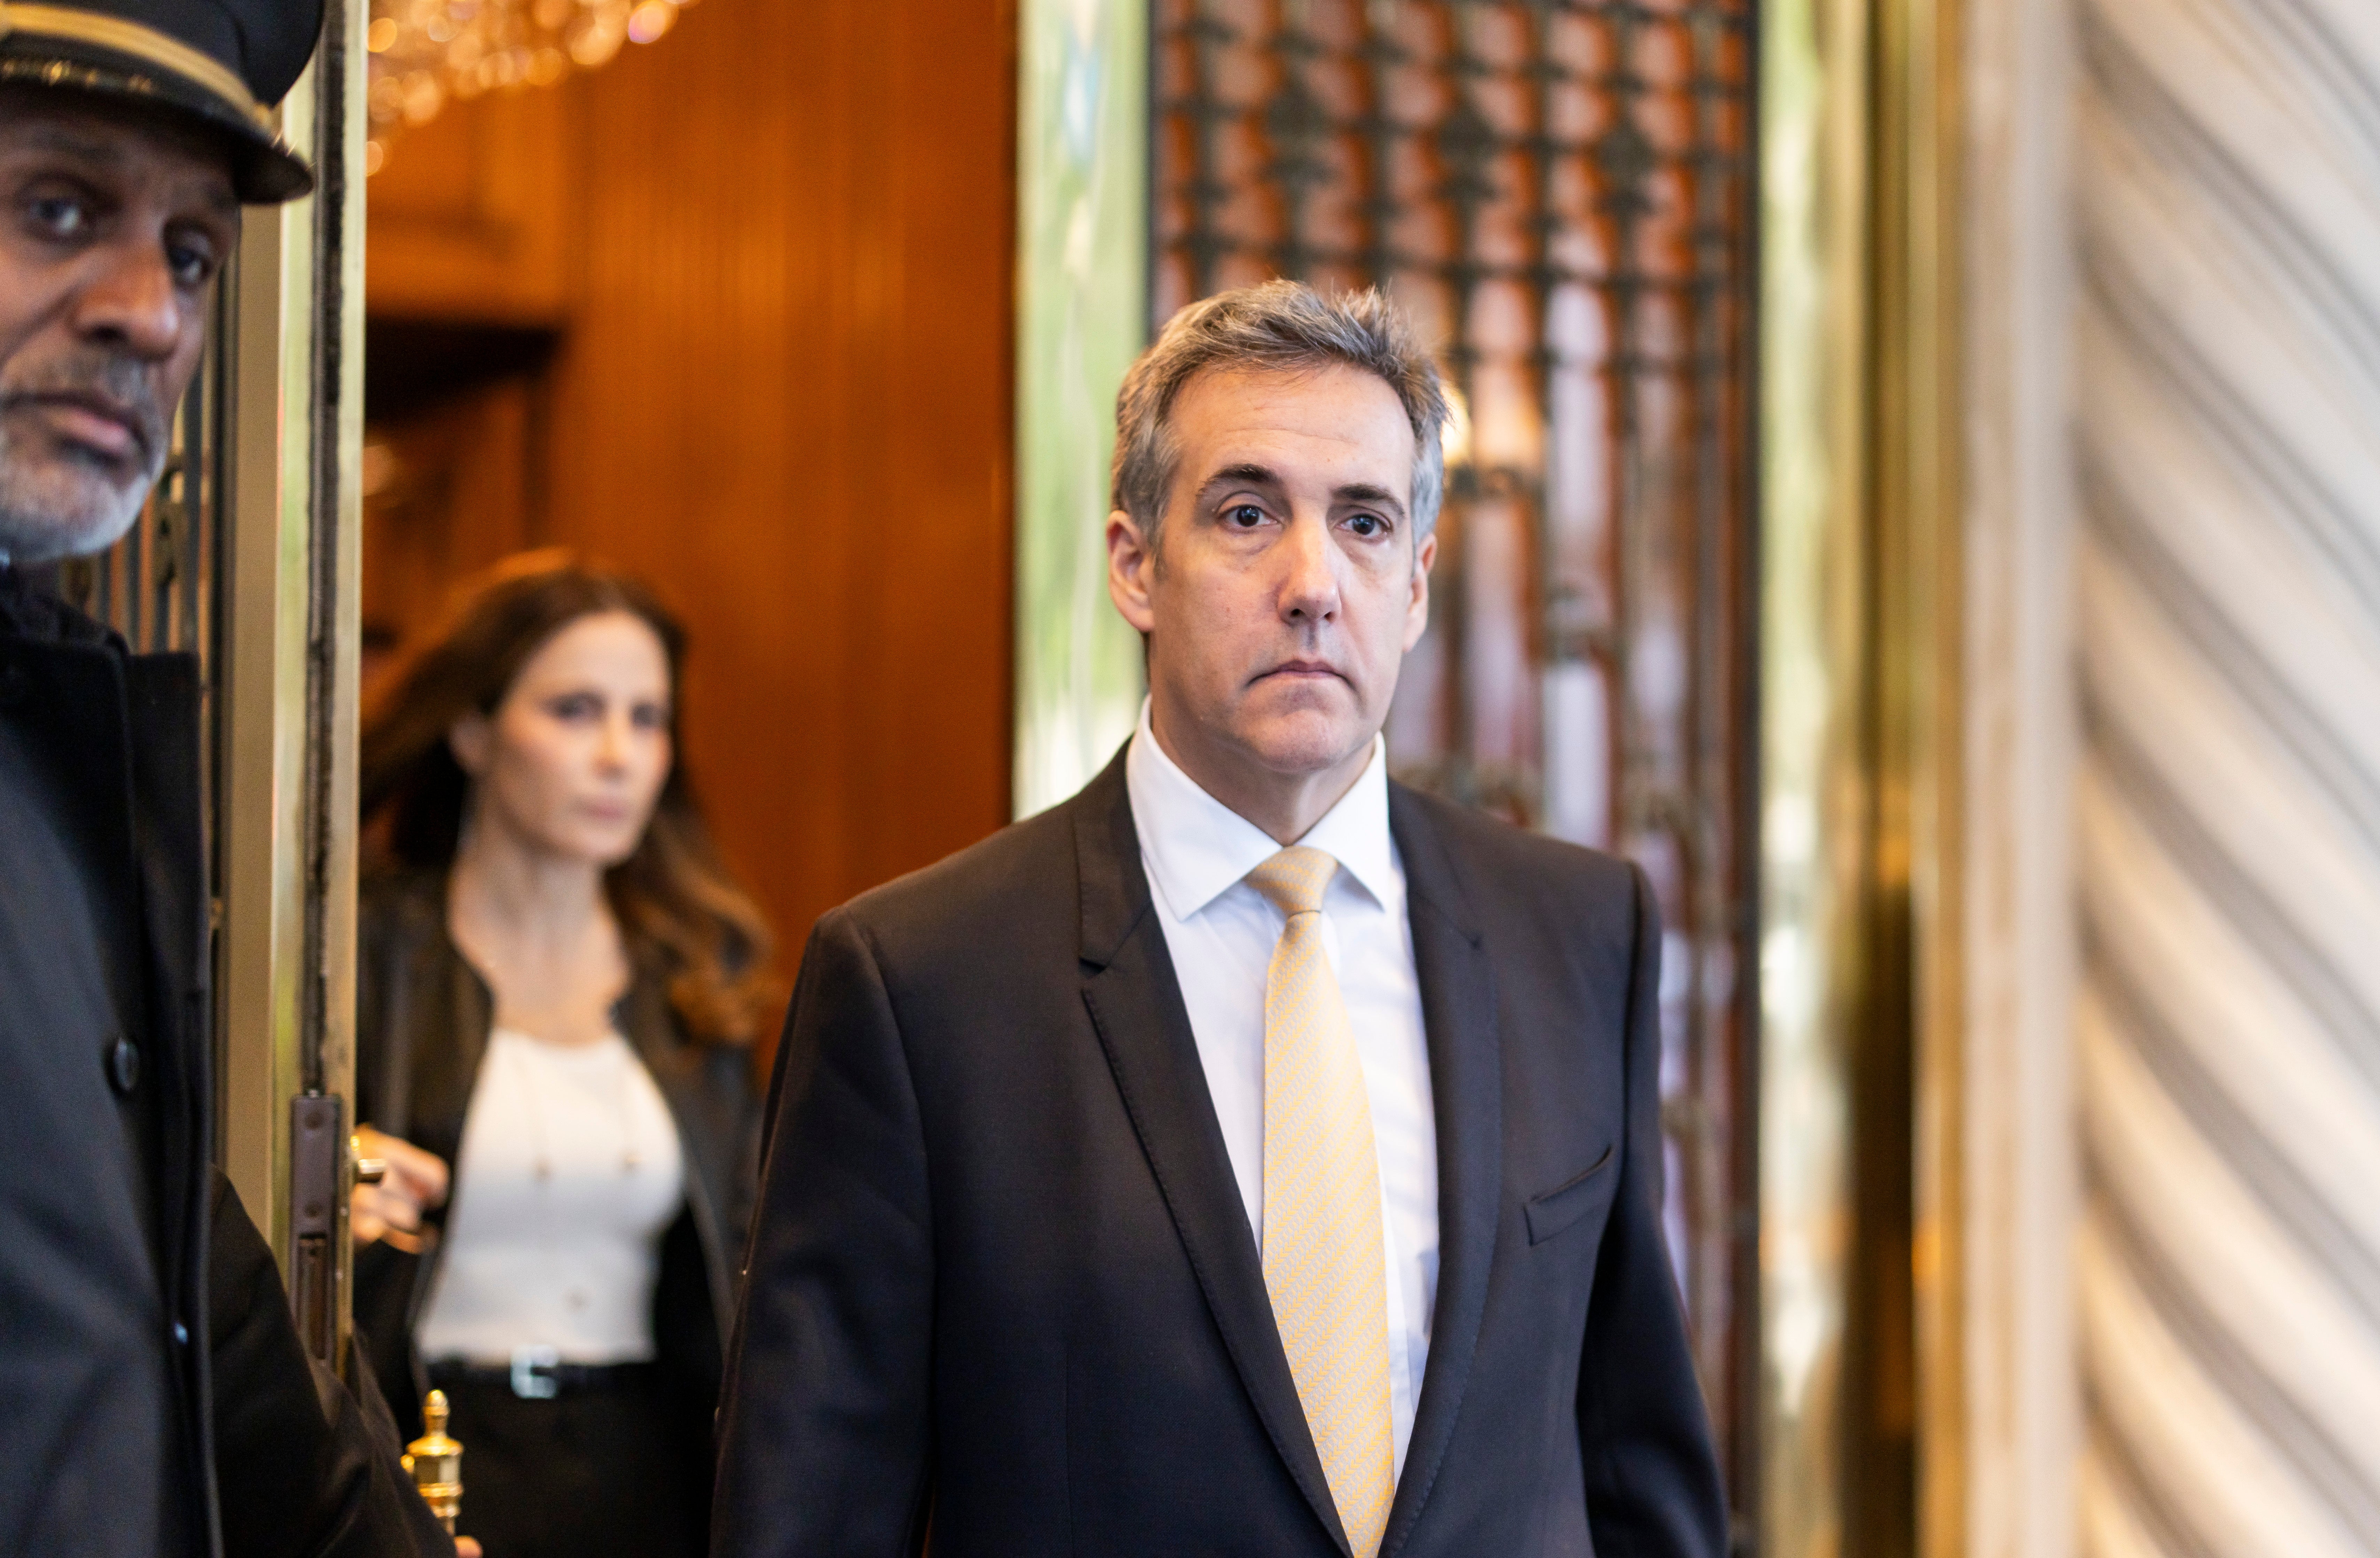 Trump's former lawyer Michael Cohen leaves his apartment building on his way to testify in former US president Donald Trump’s ongoing criminal trial at New York State Supreme Court in New York this week